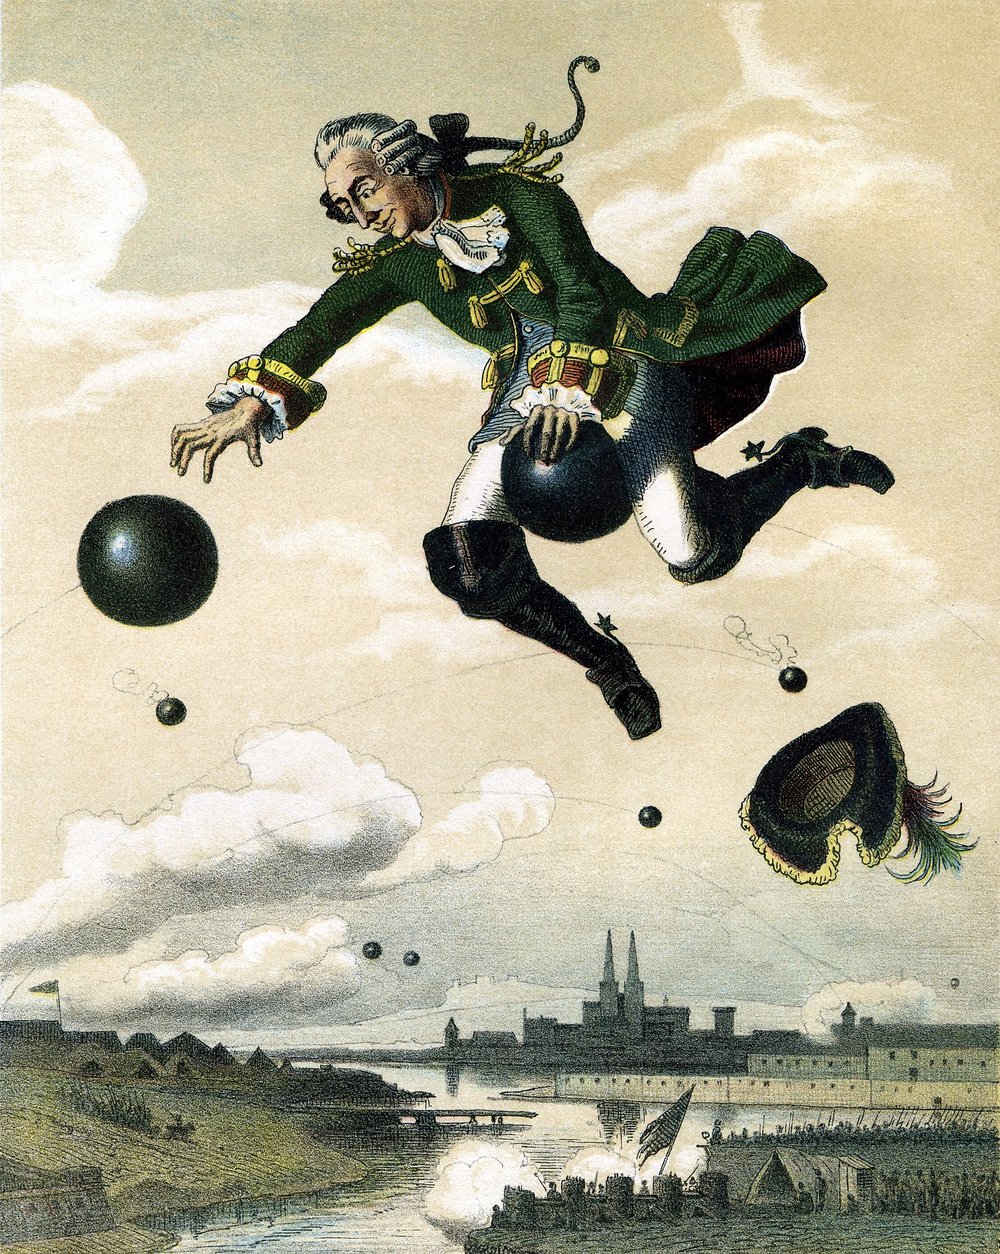  The fictional Munchaussen (note the distinct spelling) rides a cannonball in one such highly improbably adventure.   Source: Wikimedia commons 